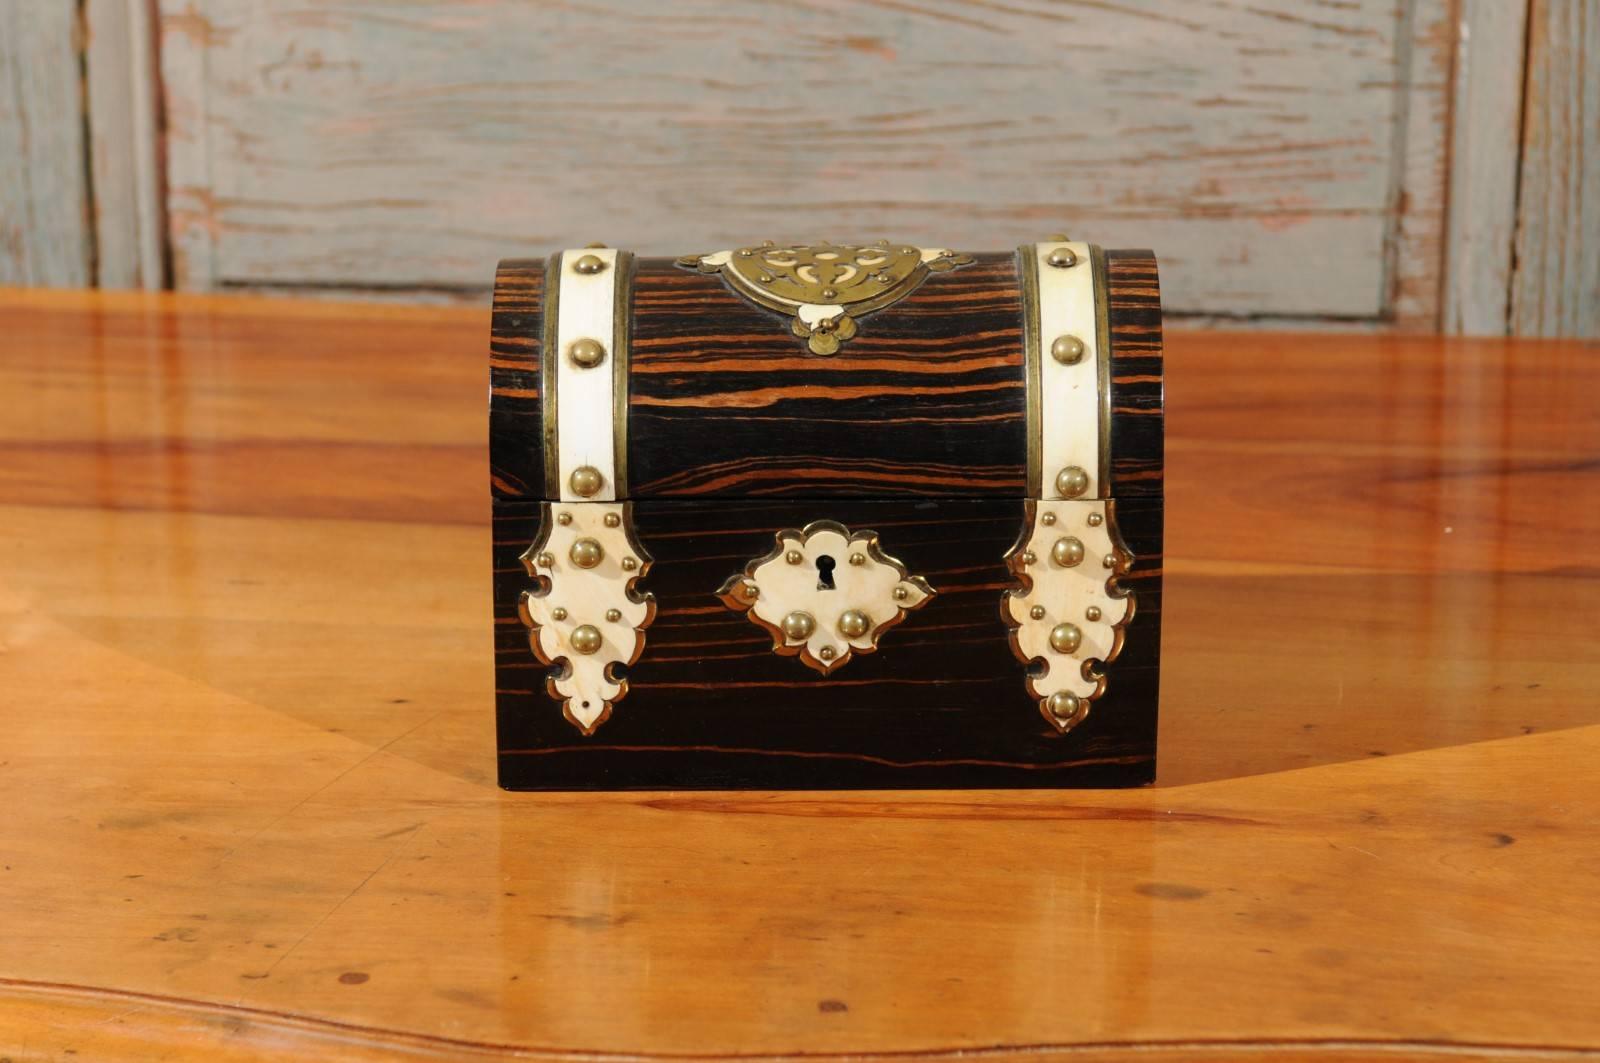 19th century English brass and bone banded calamander box with dome top.